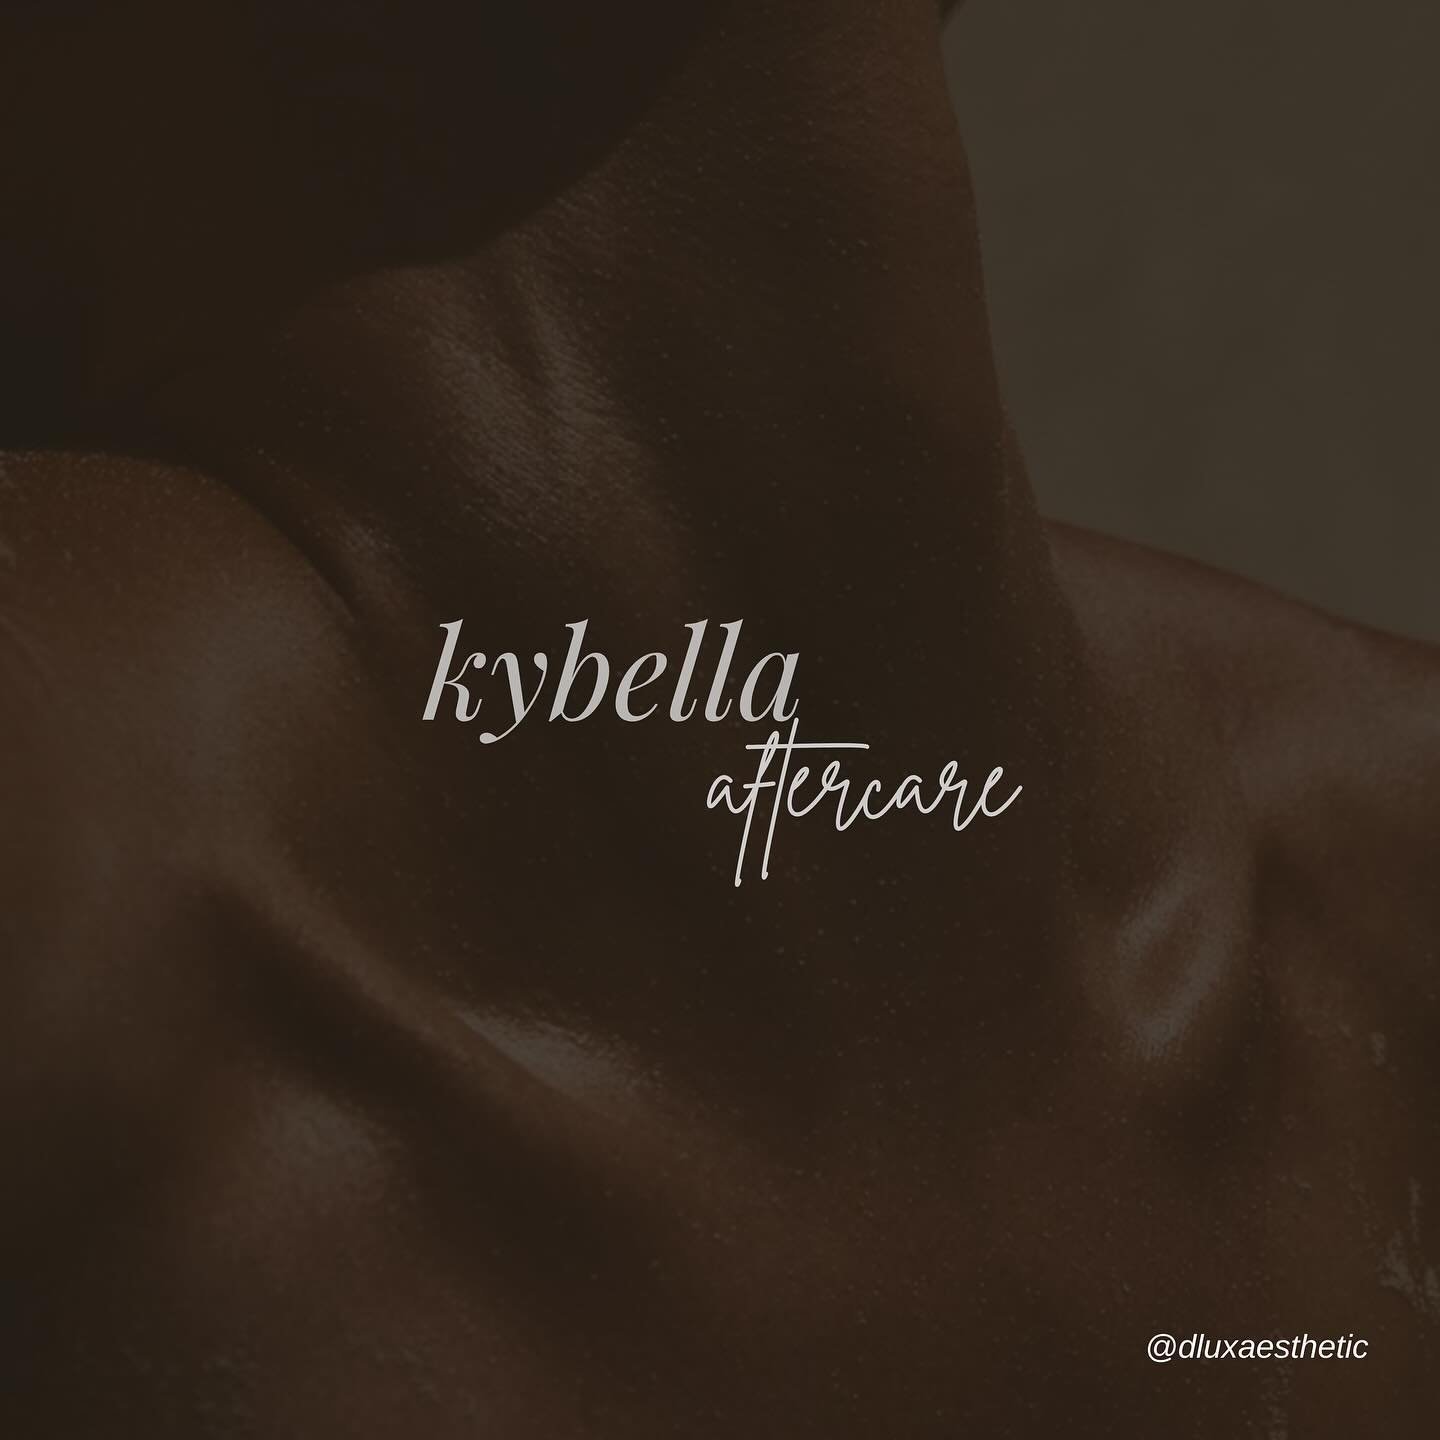 Aftercare for your Kybella treatment ✨💉 Follow these rules and you&rsquo;ll be smooth sailing!

👩🏼&zwj;⚕️ Danielle White, MSN, FNP-C
📍 6327 N. Andrews Ave. Ste 19 &amp; 22 Fort Lauderdale, Florida
💌 info@dluxaesthetic.com
📞 (954) 580-3190

#dlu